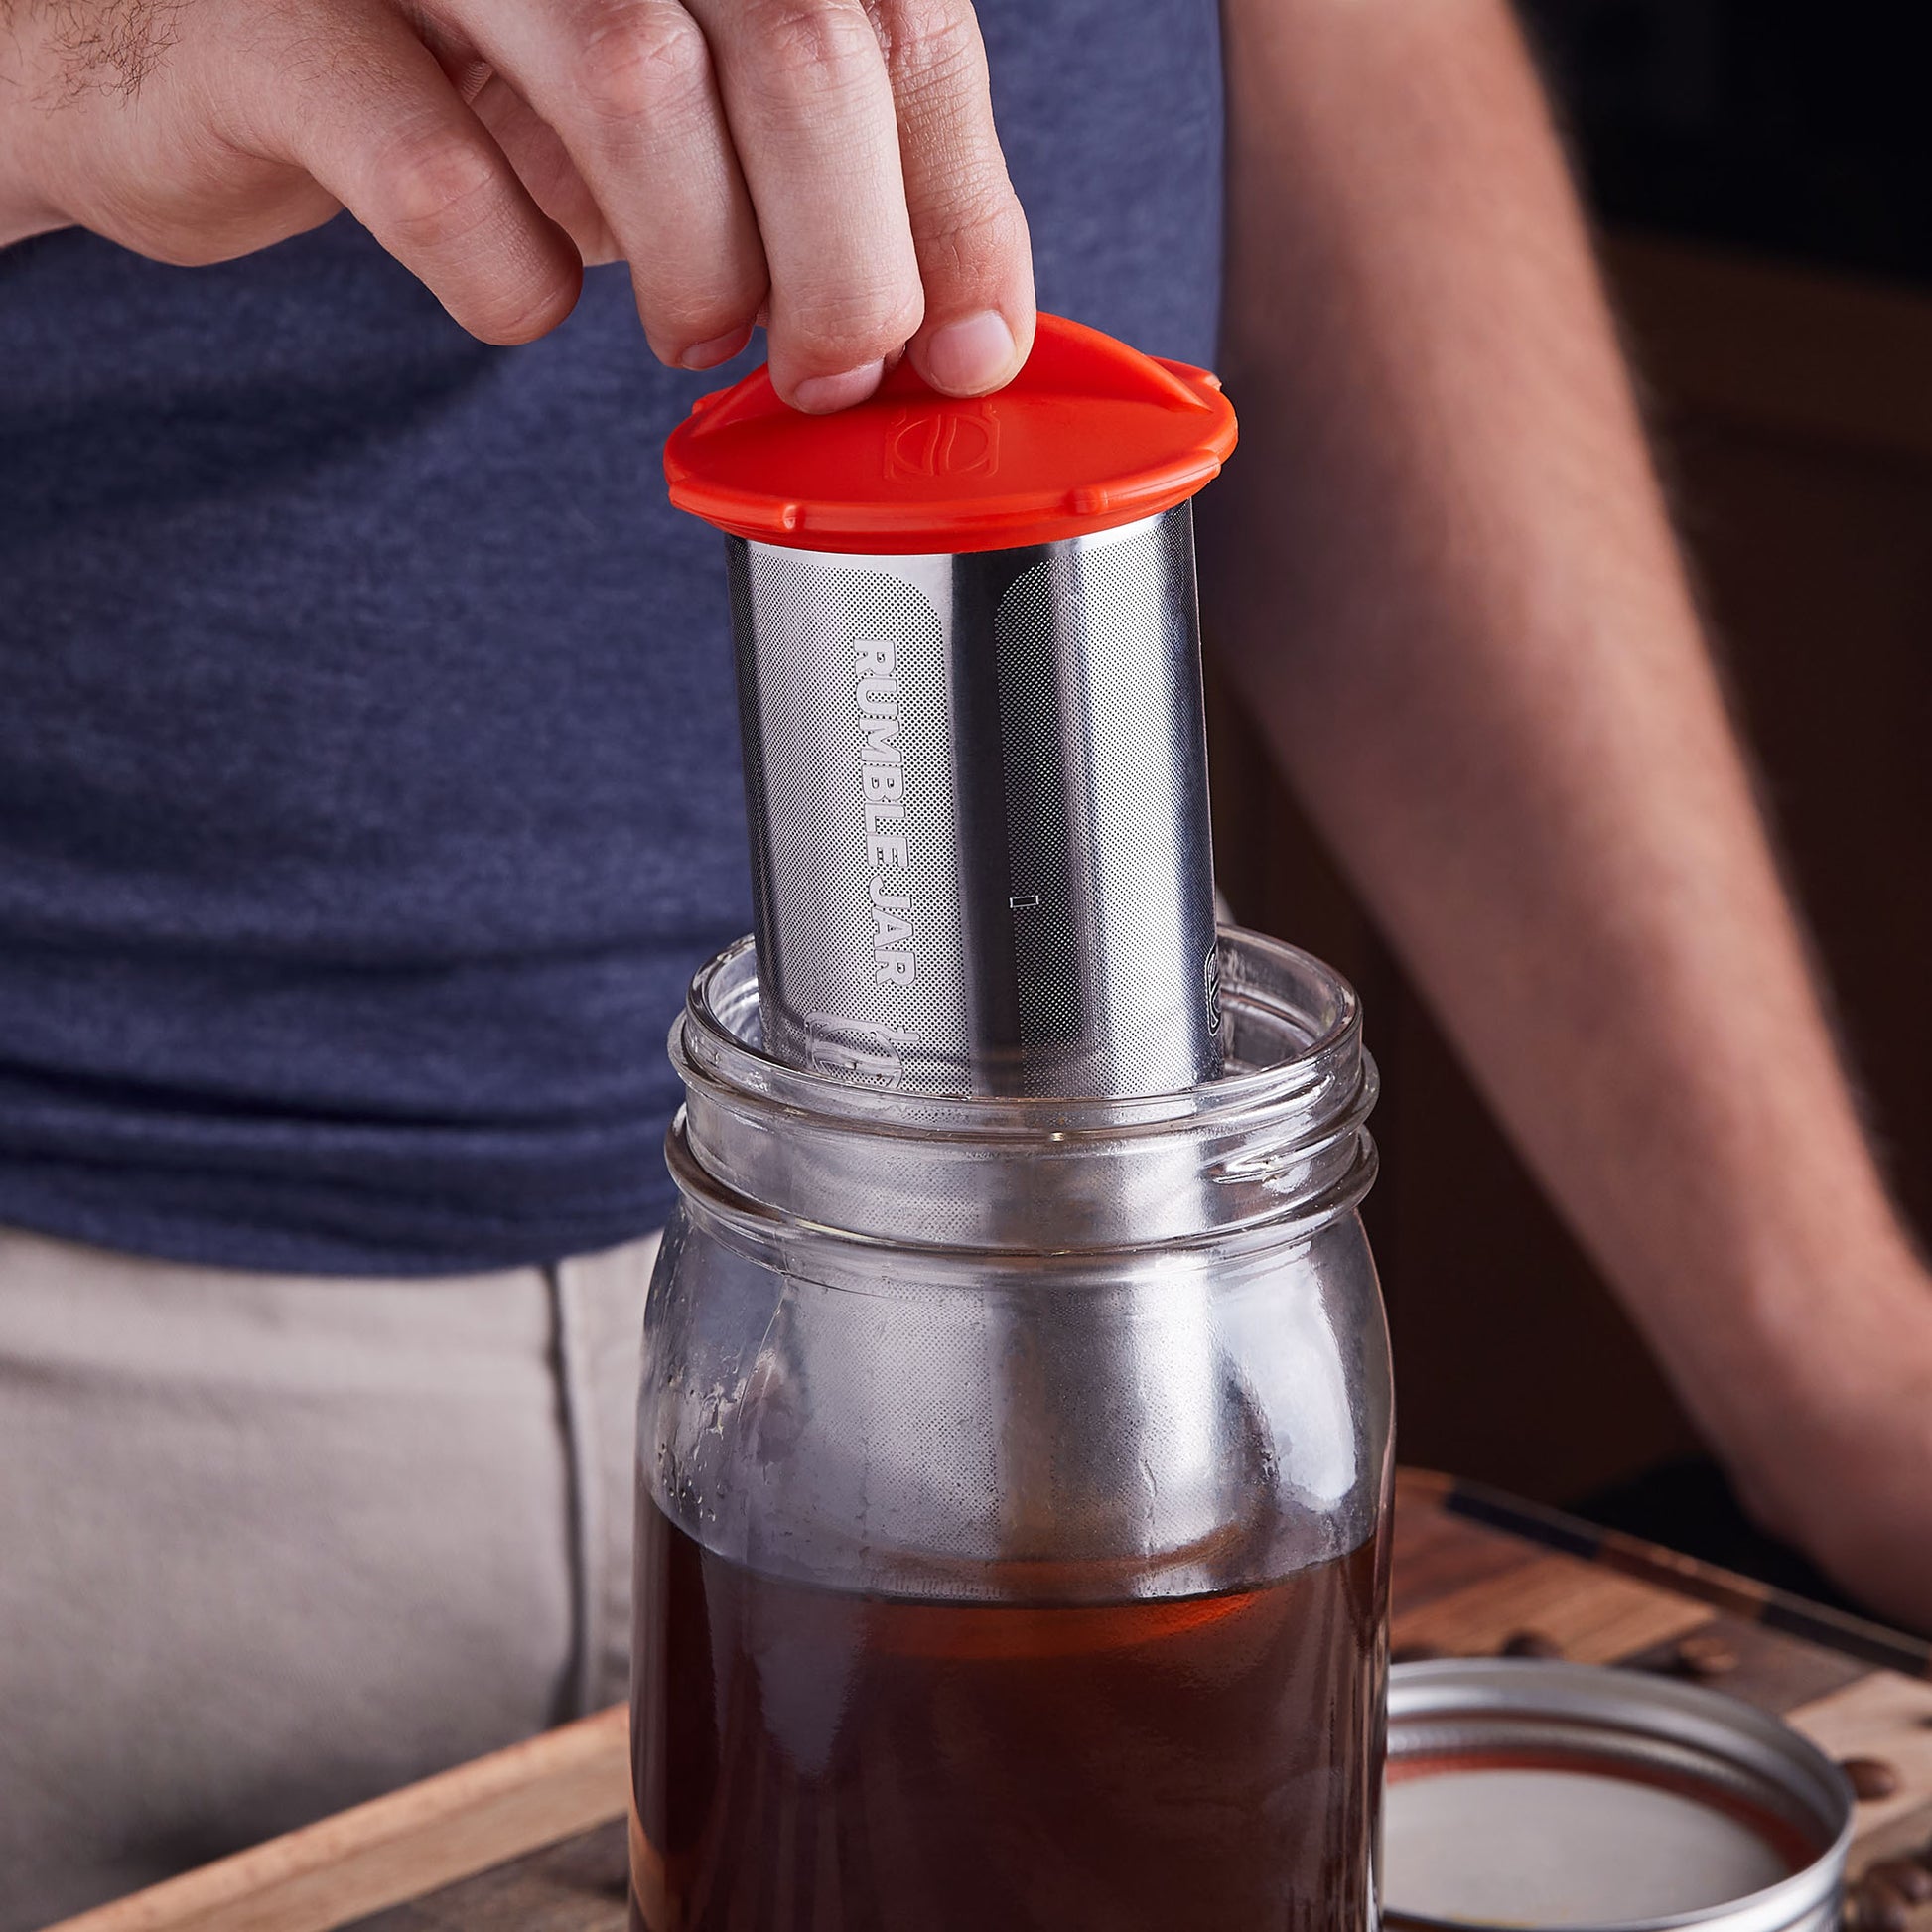 The Rumble Jar - Rumble Go: Portable Cold Brew Coffee Maker (filter only)